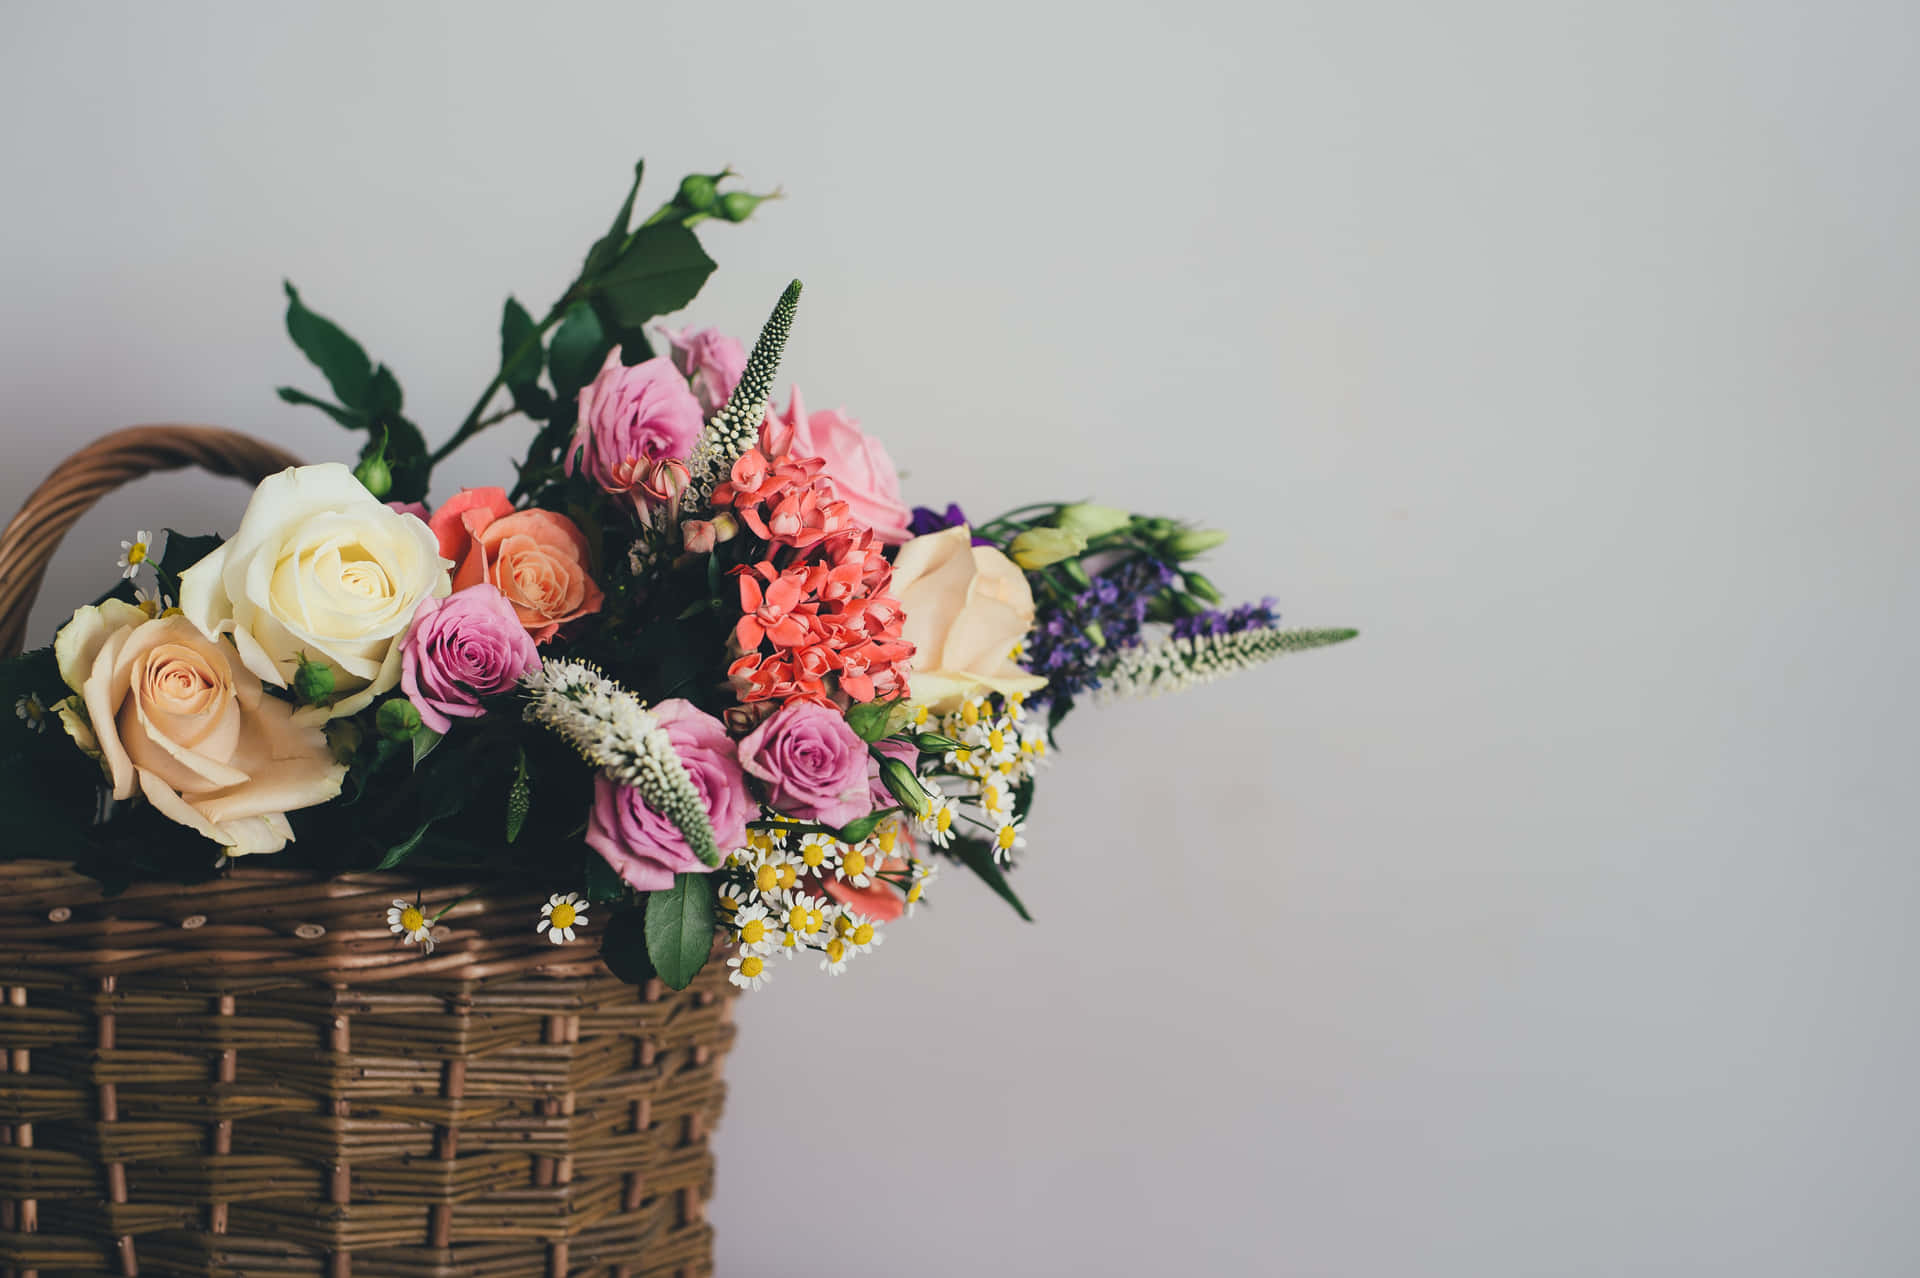 a basket of flowers on a table